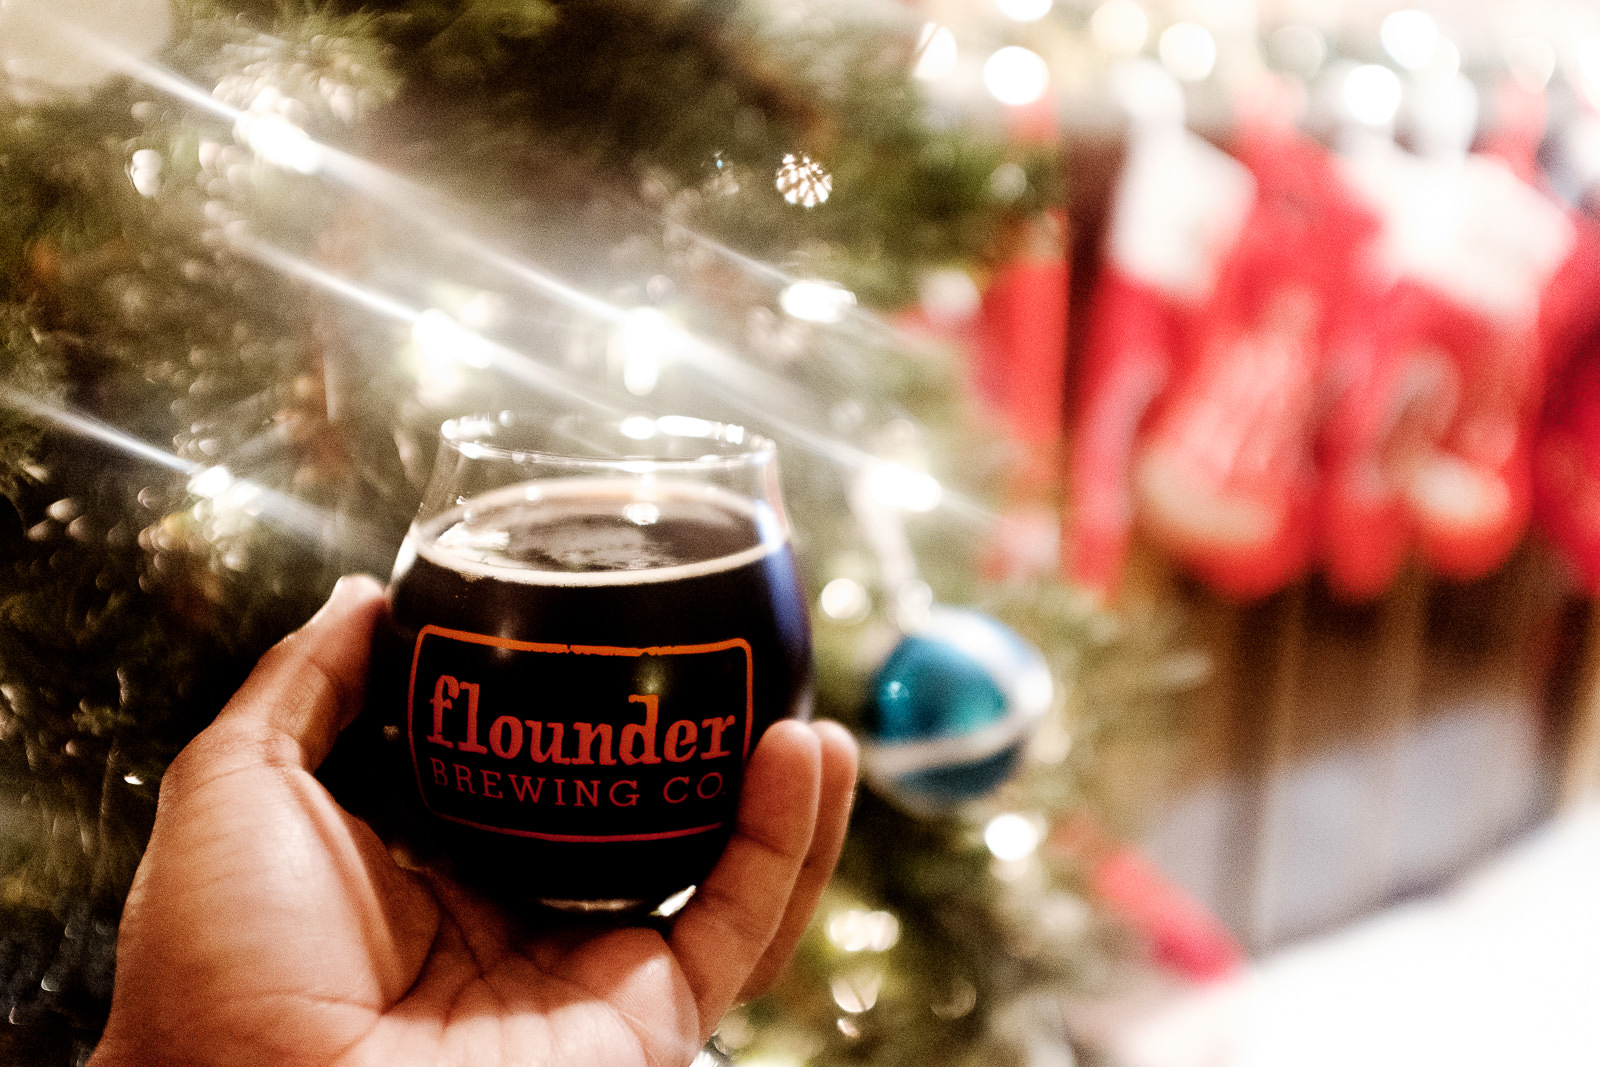 Flounder Brewing Co’s St. Nick Christmas Ale